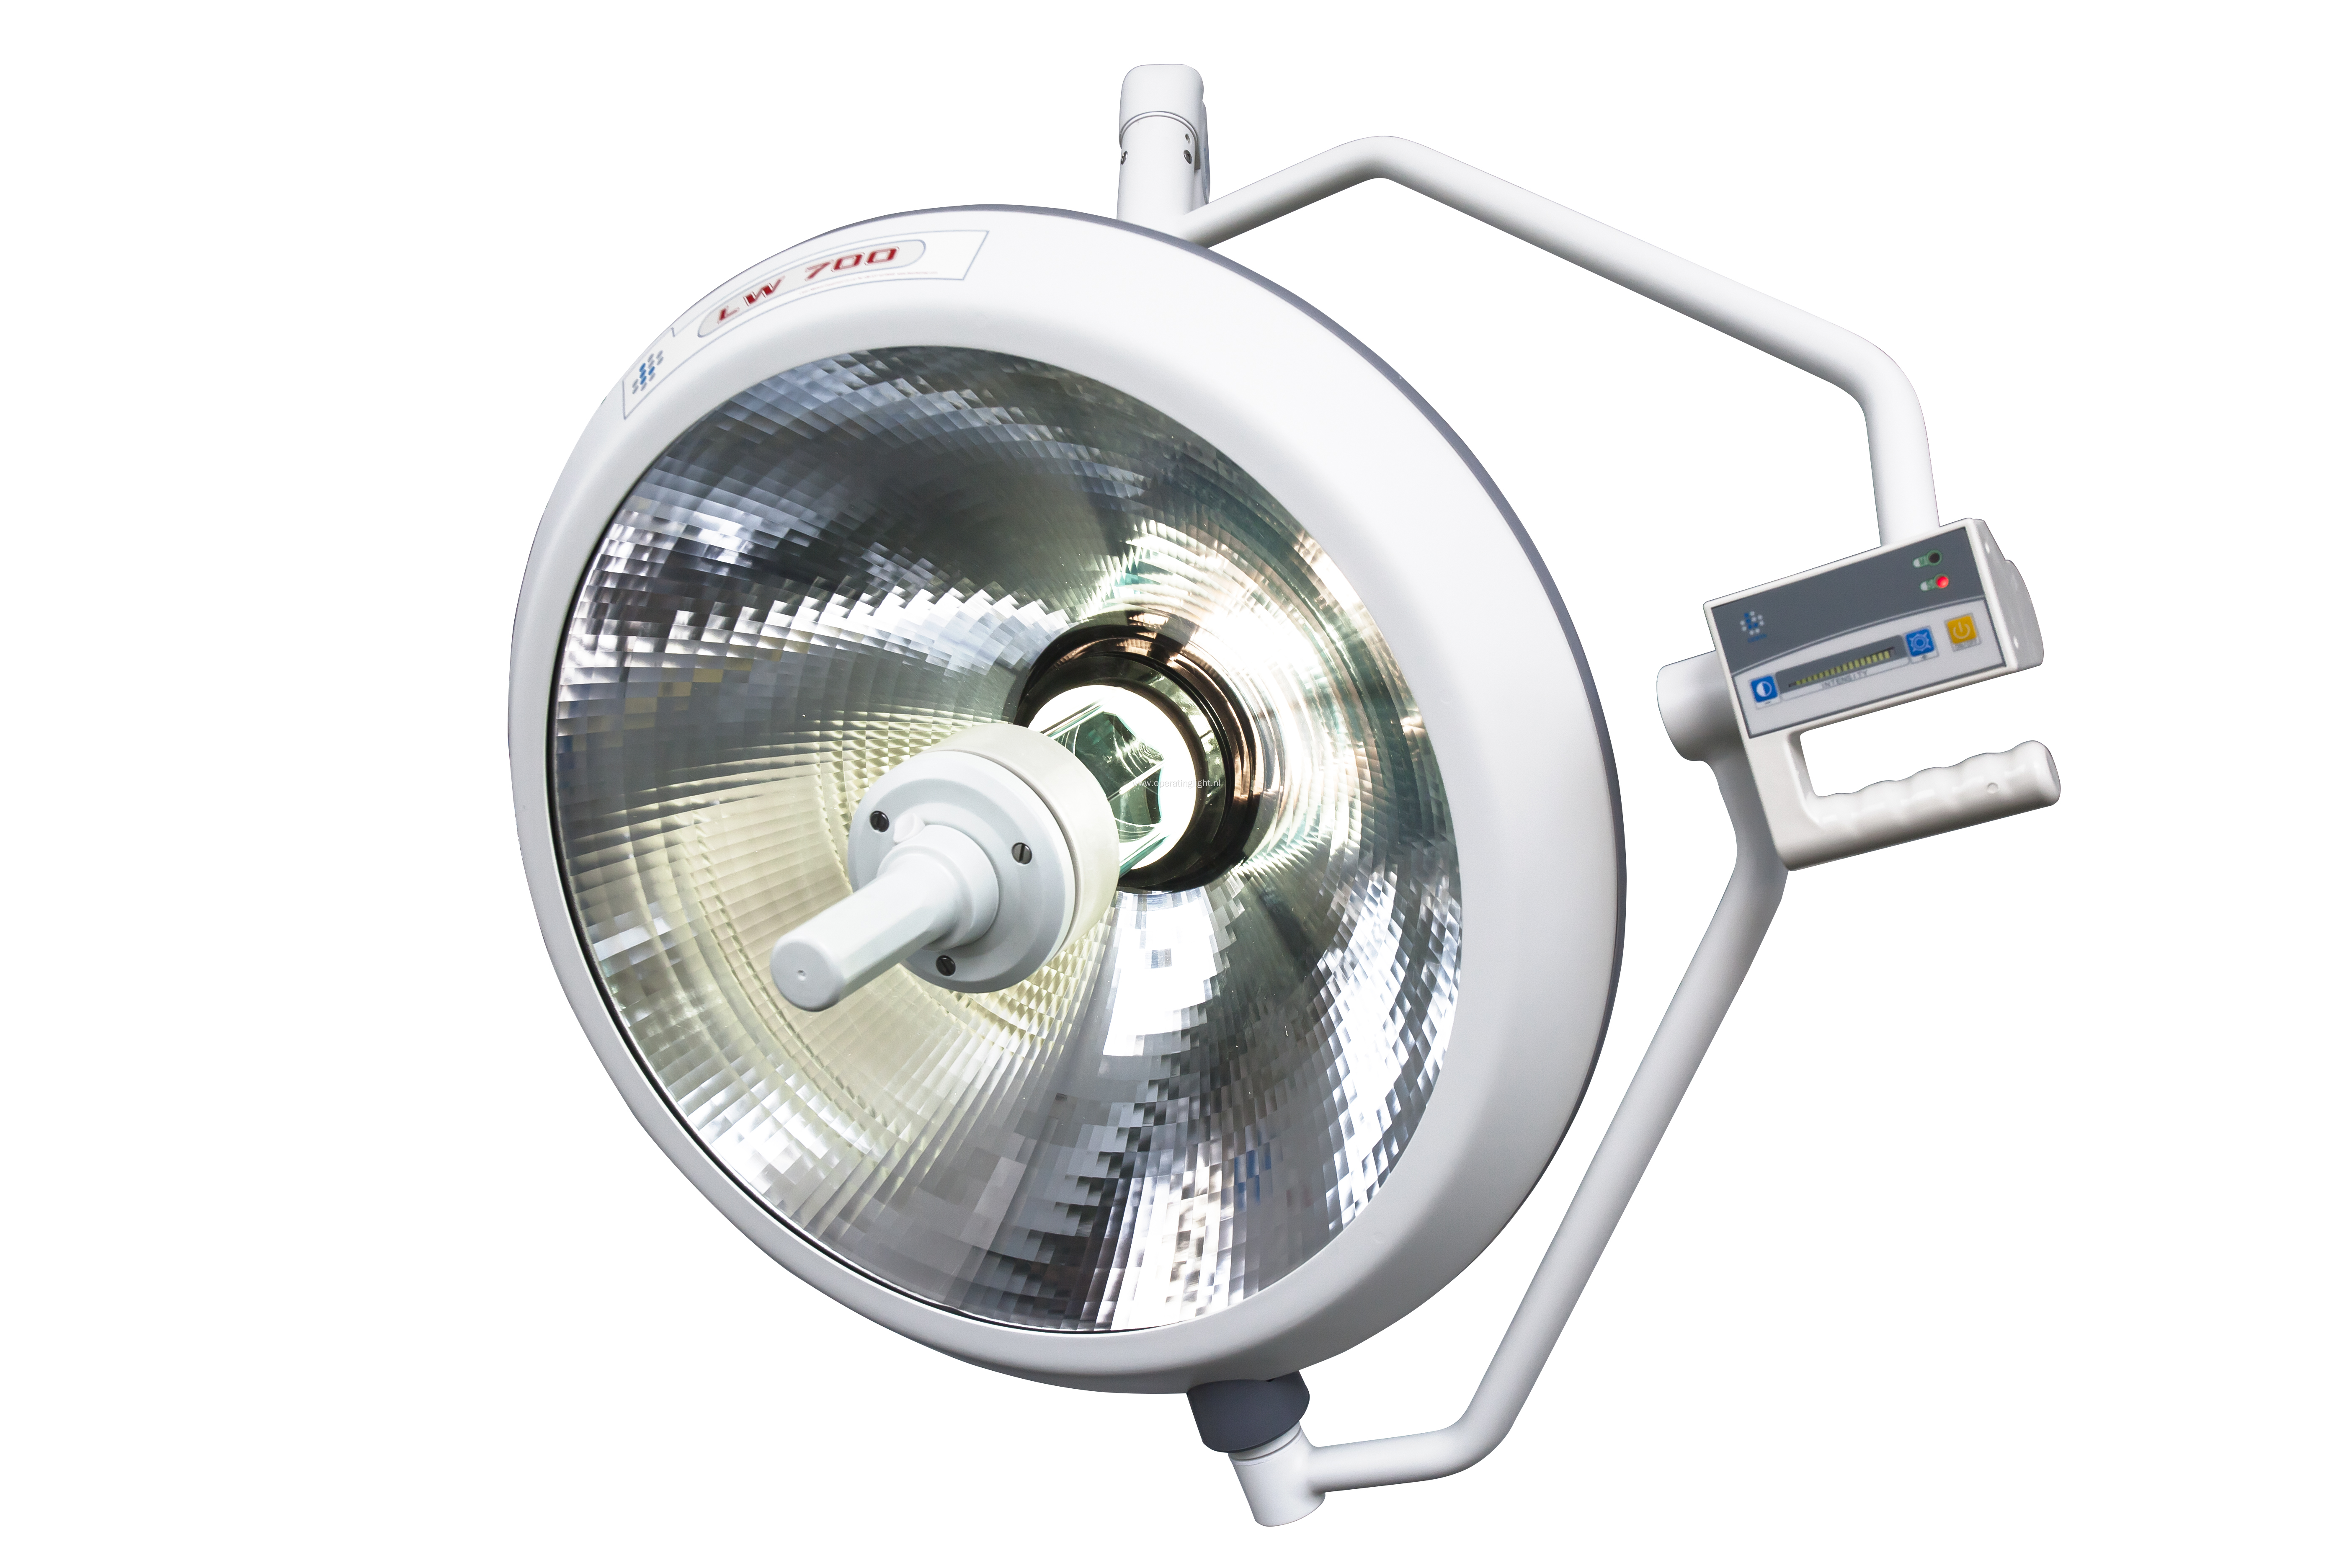 Clinic center ICU OR Room Operating Lamp